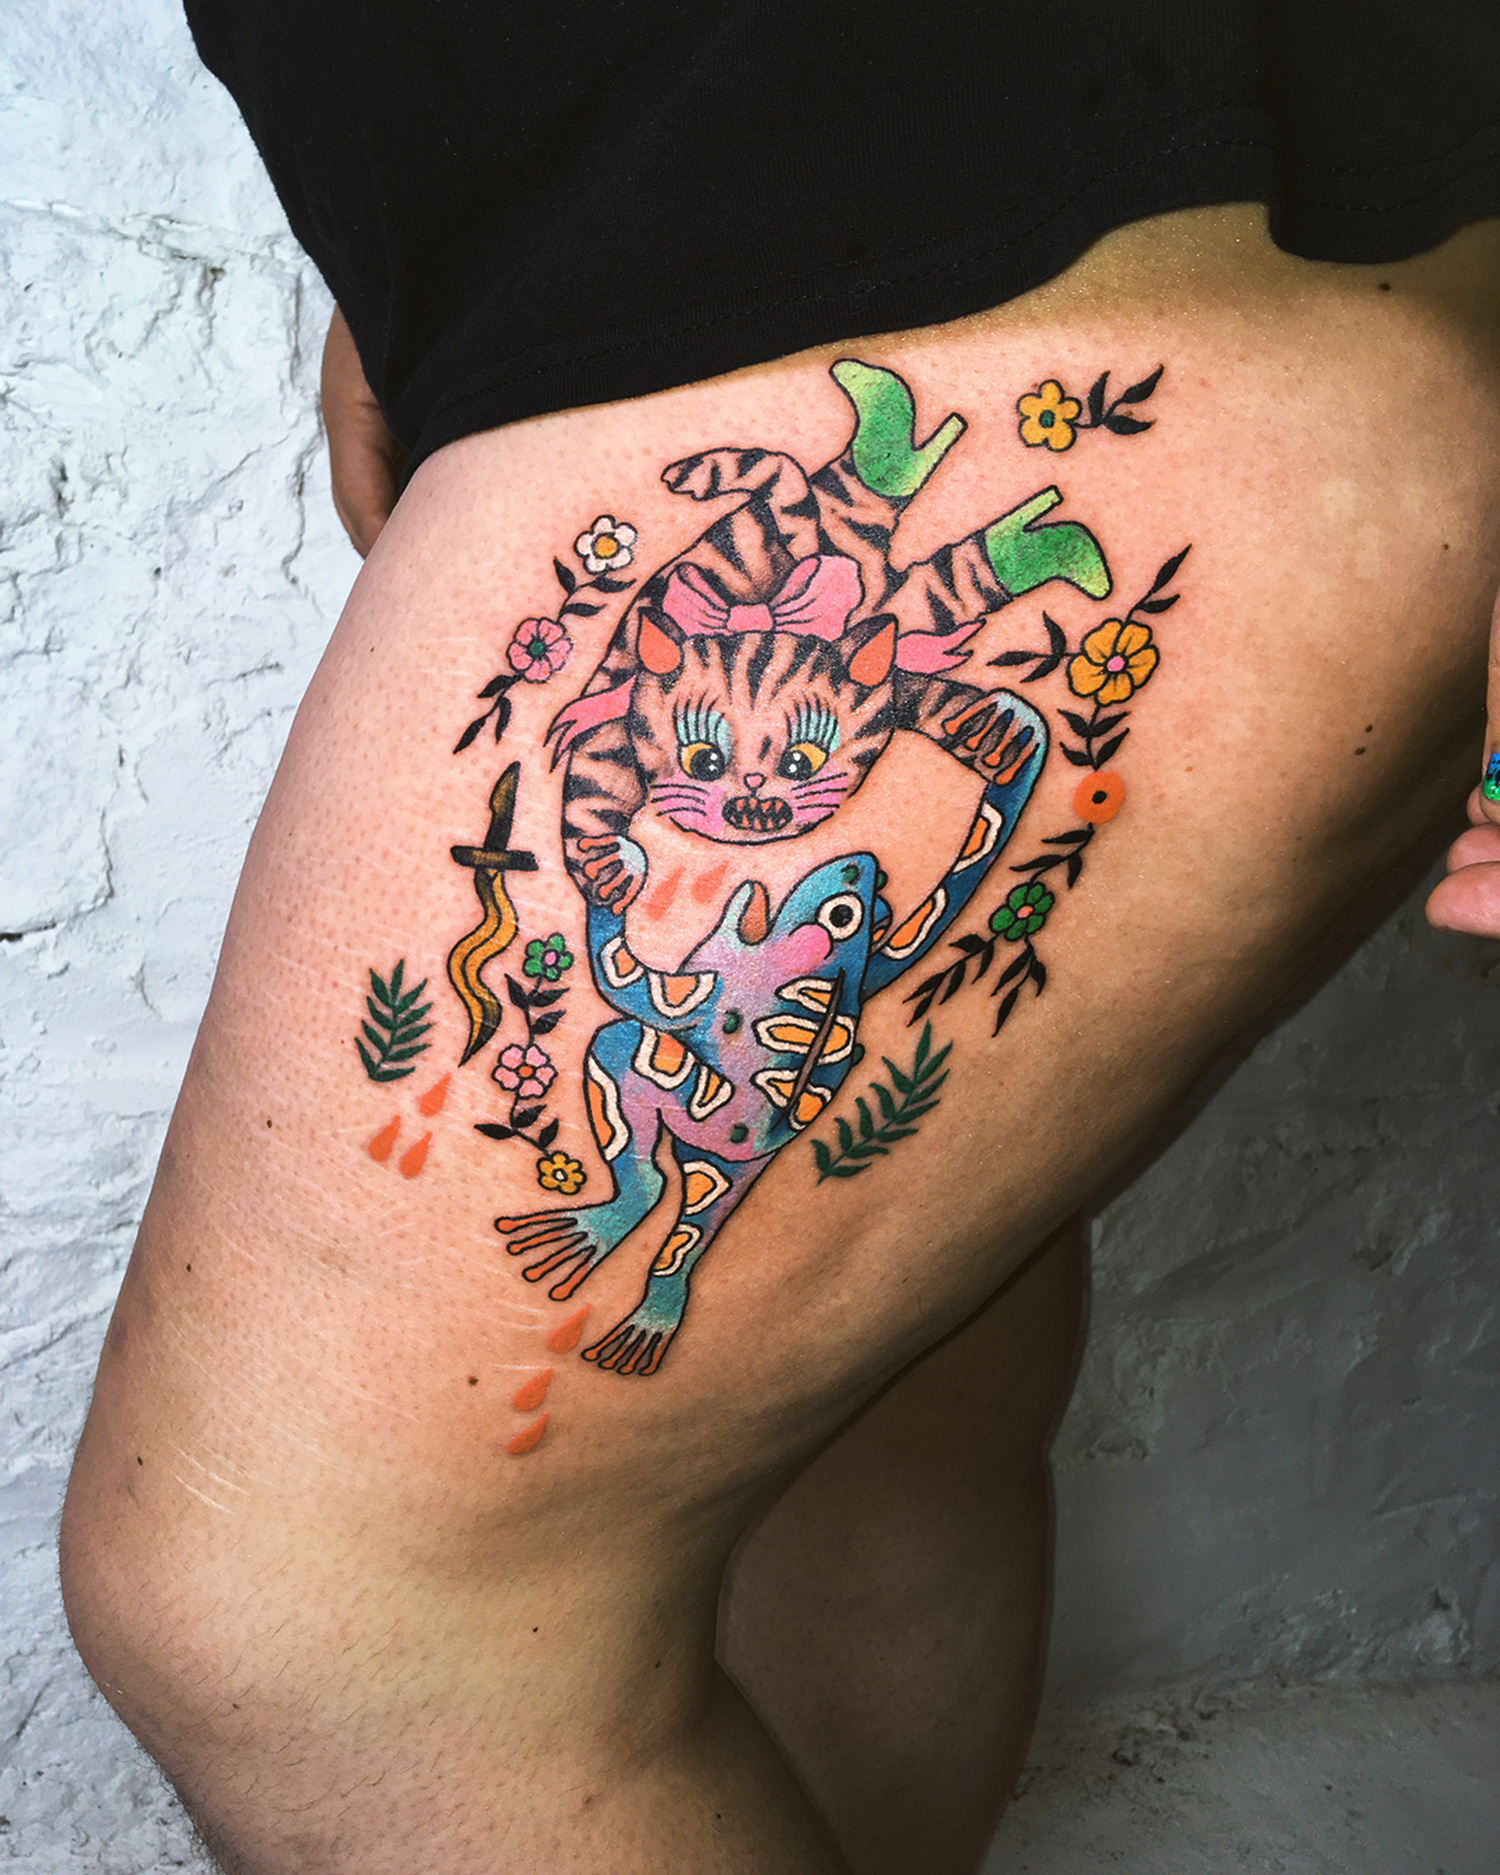 Charline Bataille - cat and frog freaks tattoo